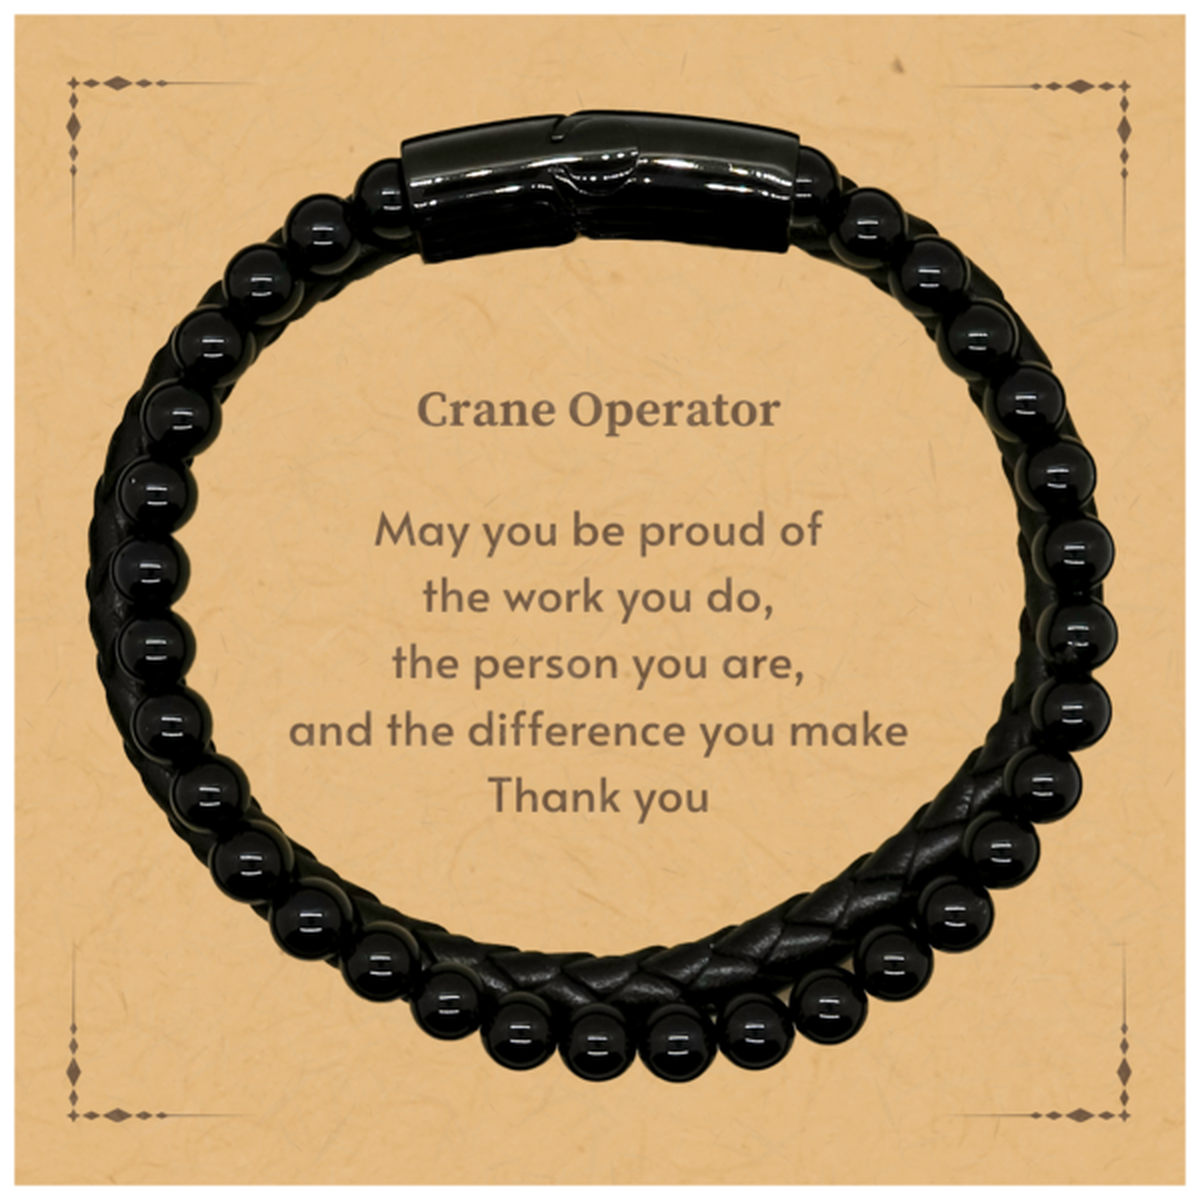 Heartwarming Stone Leather Bracelets Retirement Coworkers Gifts for Crane Operator, Crane Operator May You be proud of the work you do, the person you are Gifts for Boss Men Women Friends